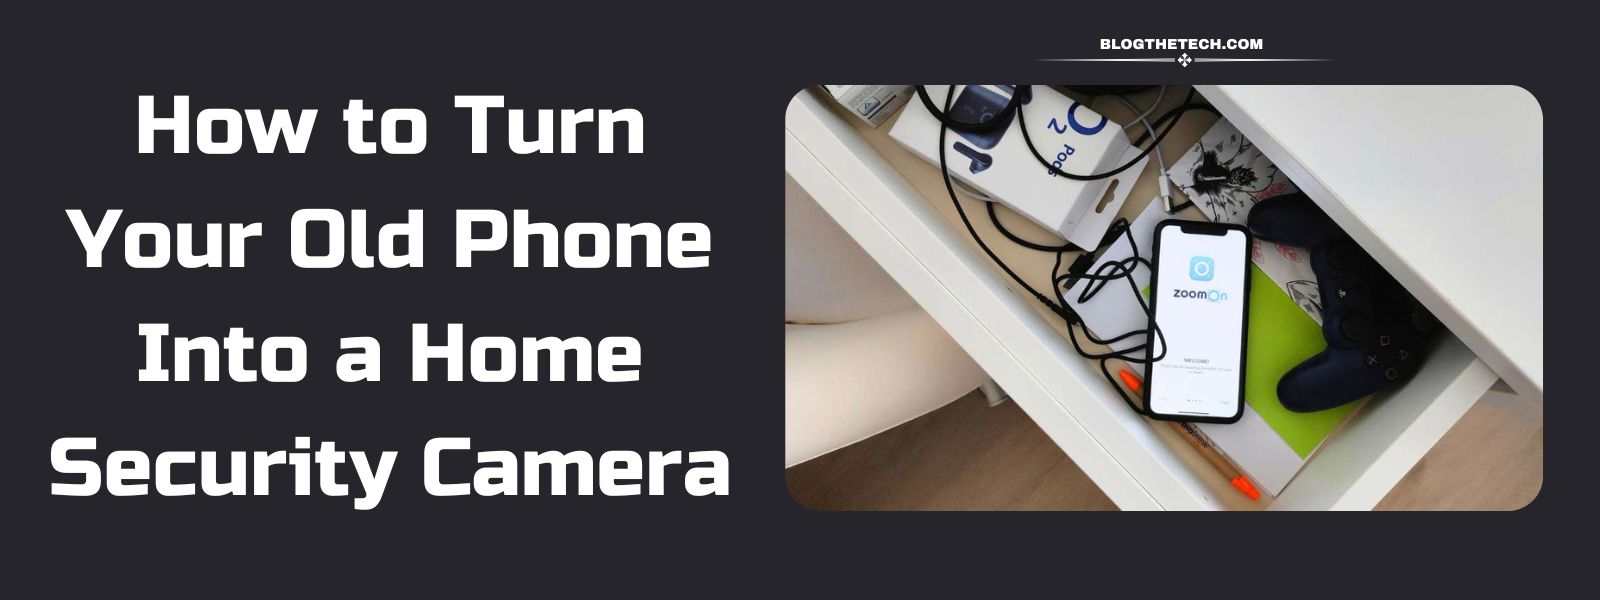 How to Turn Your Old Phone Into a Home Security Camera